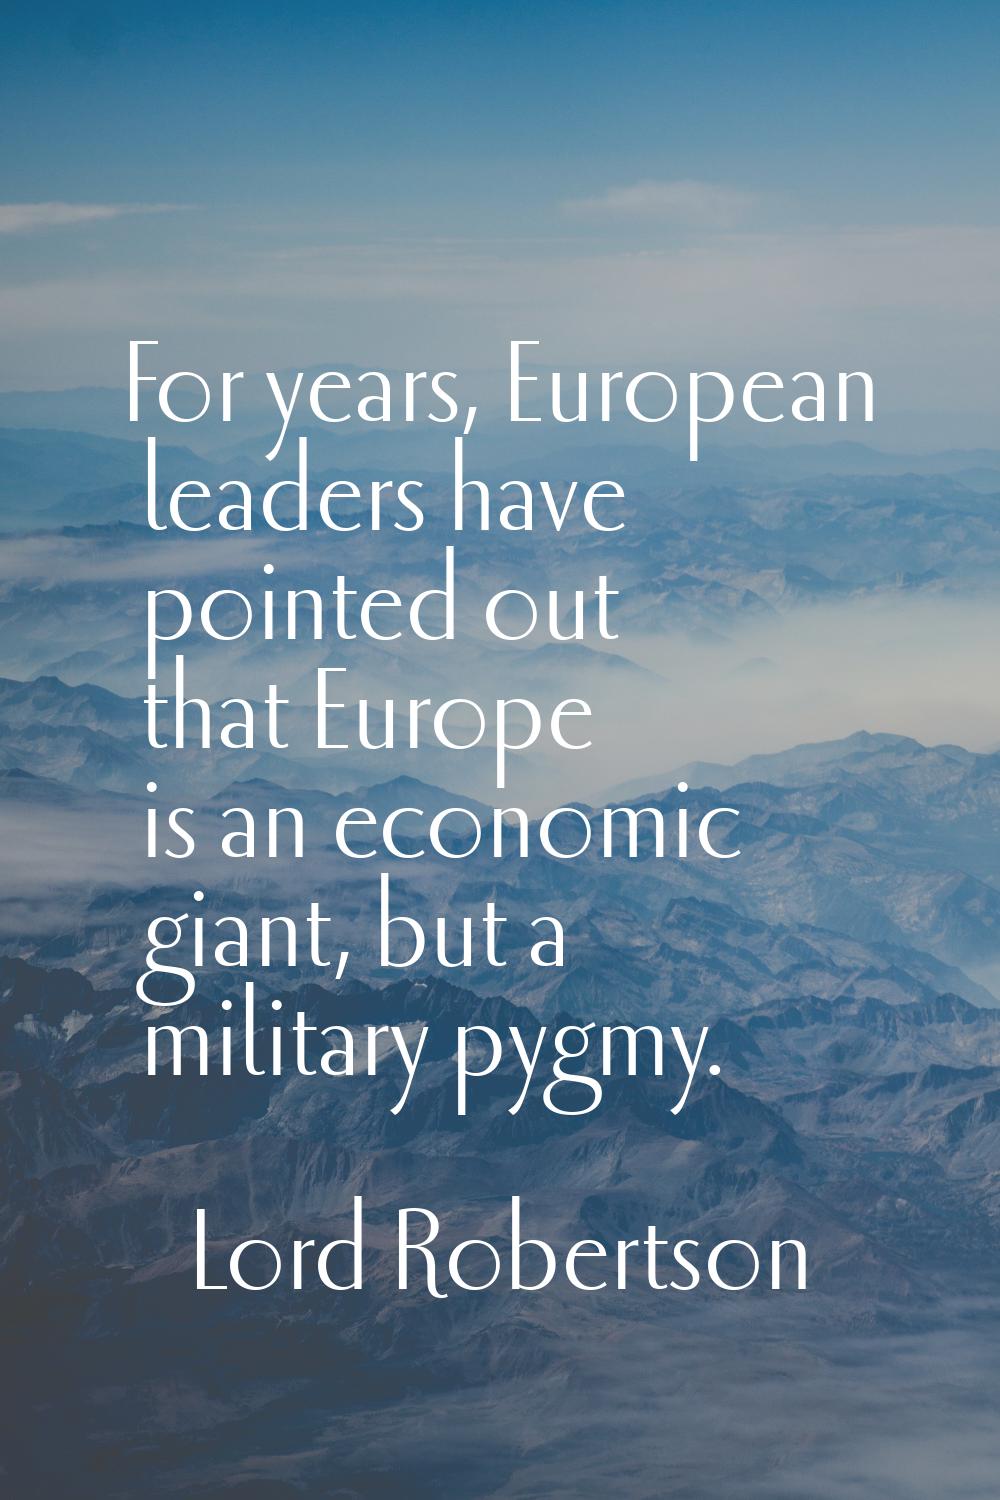 For years, European leaders have pointed out that Europe is an economic giant, but a military pygmy